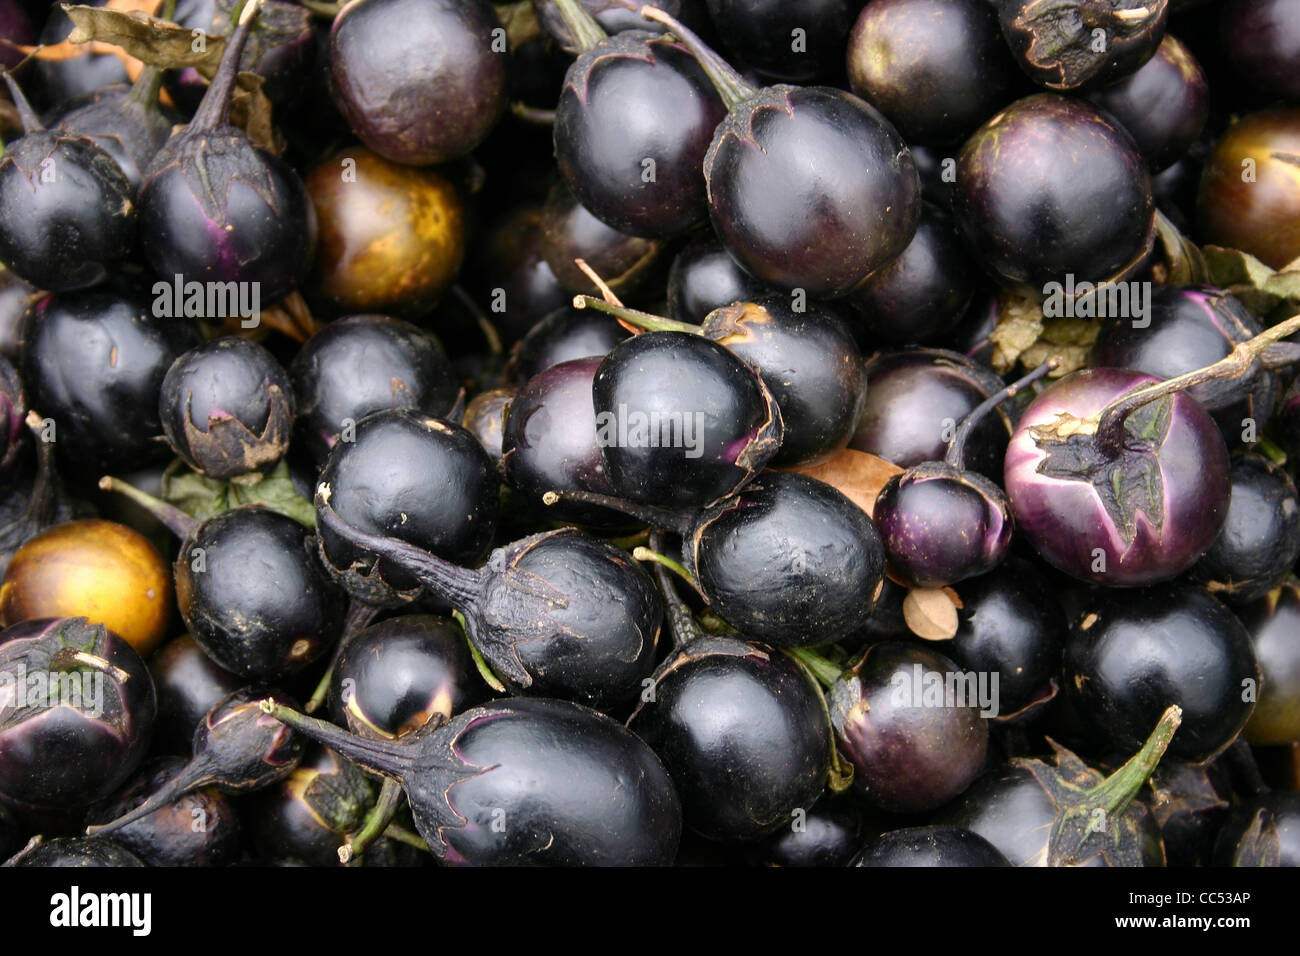 A large group of pretty Indian Eggplant Stock Photo